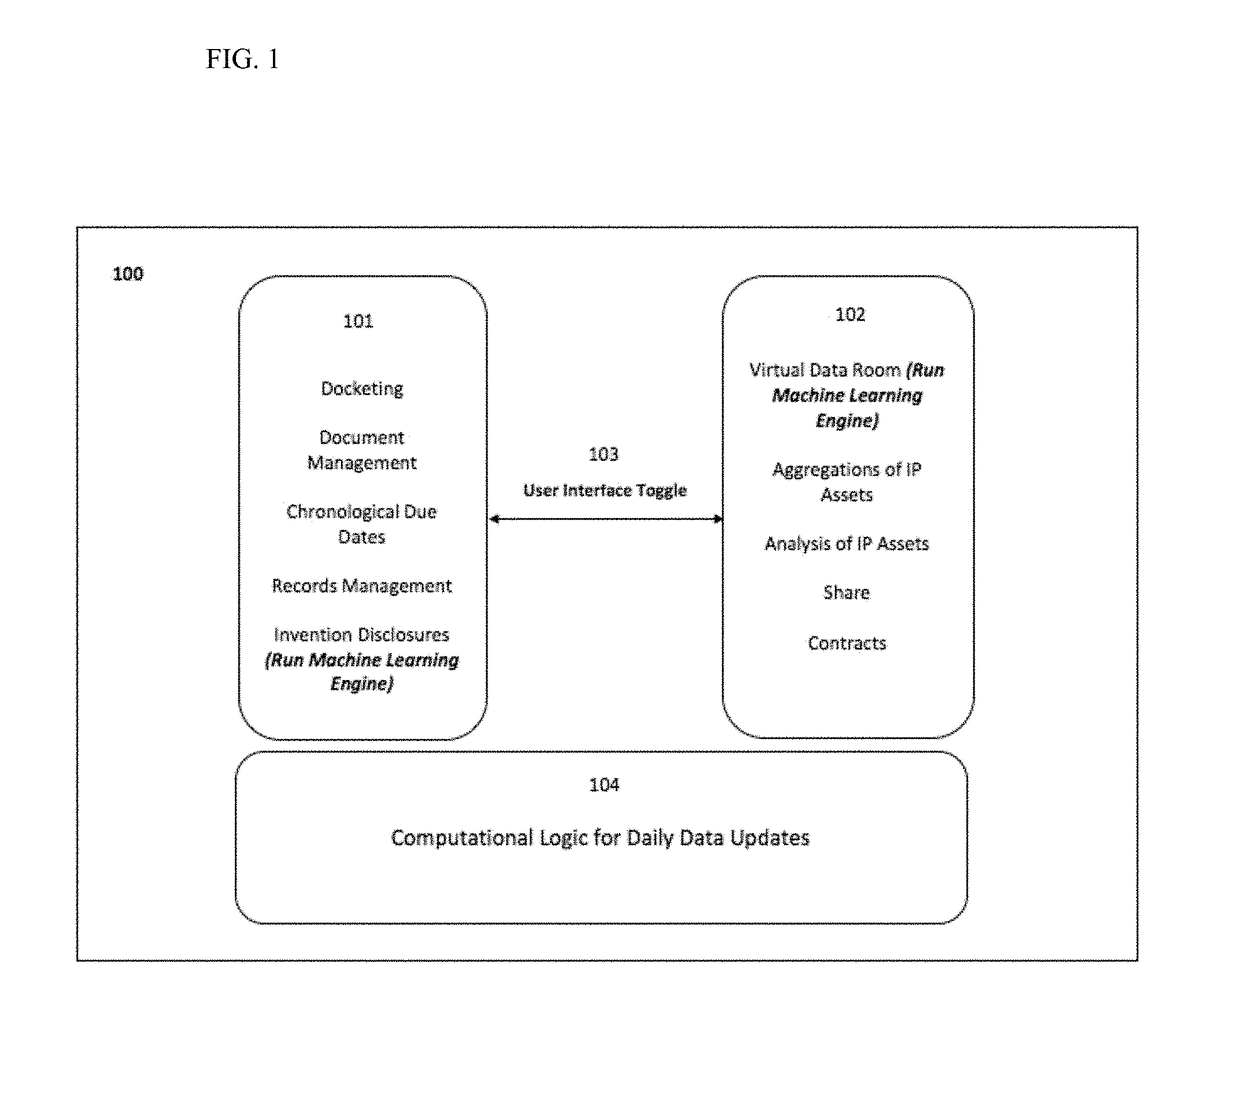 Method and apparatus for the semi-autonomous management, analysis and distribution of intellectual property assets between various entities